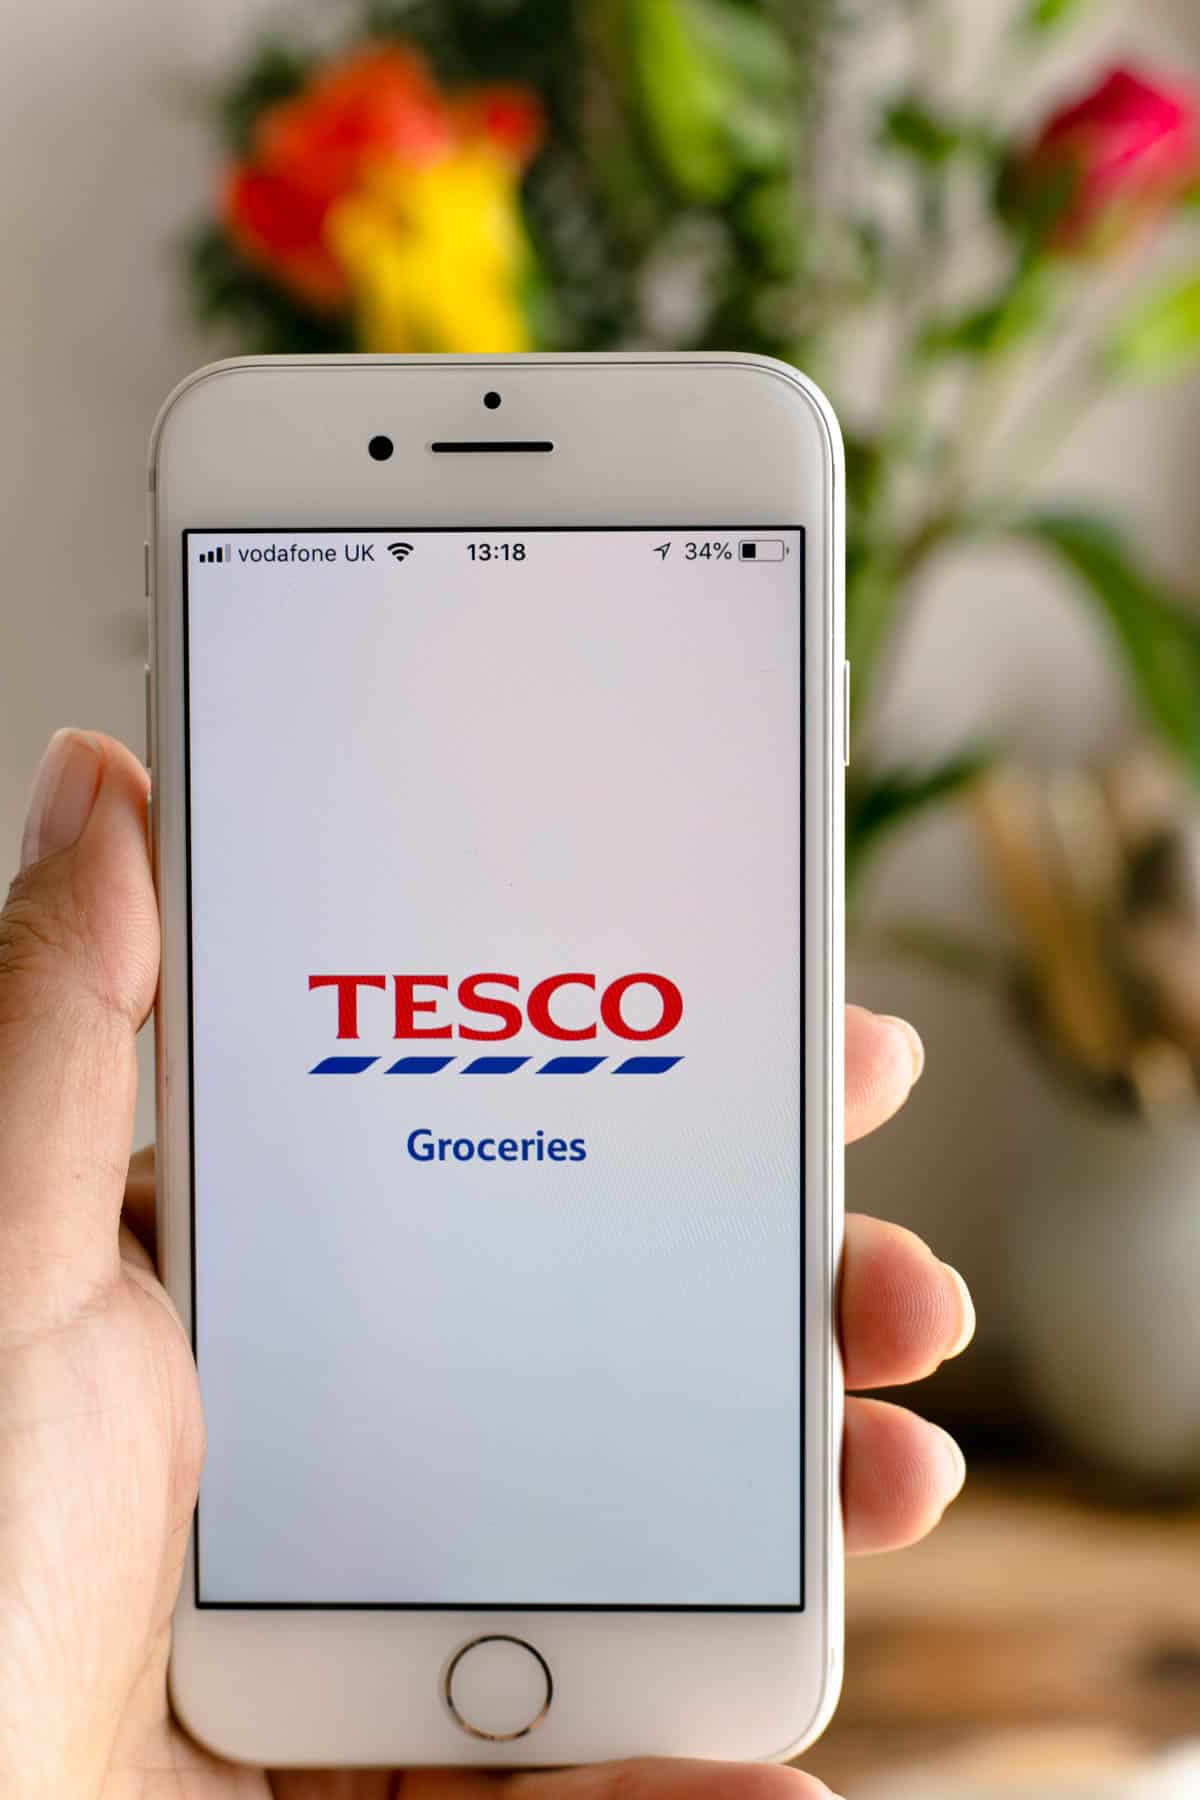 Shopping for groceries have never been easier with Tesco's latest app and its tools!